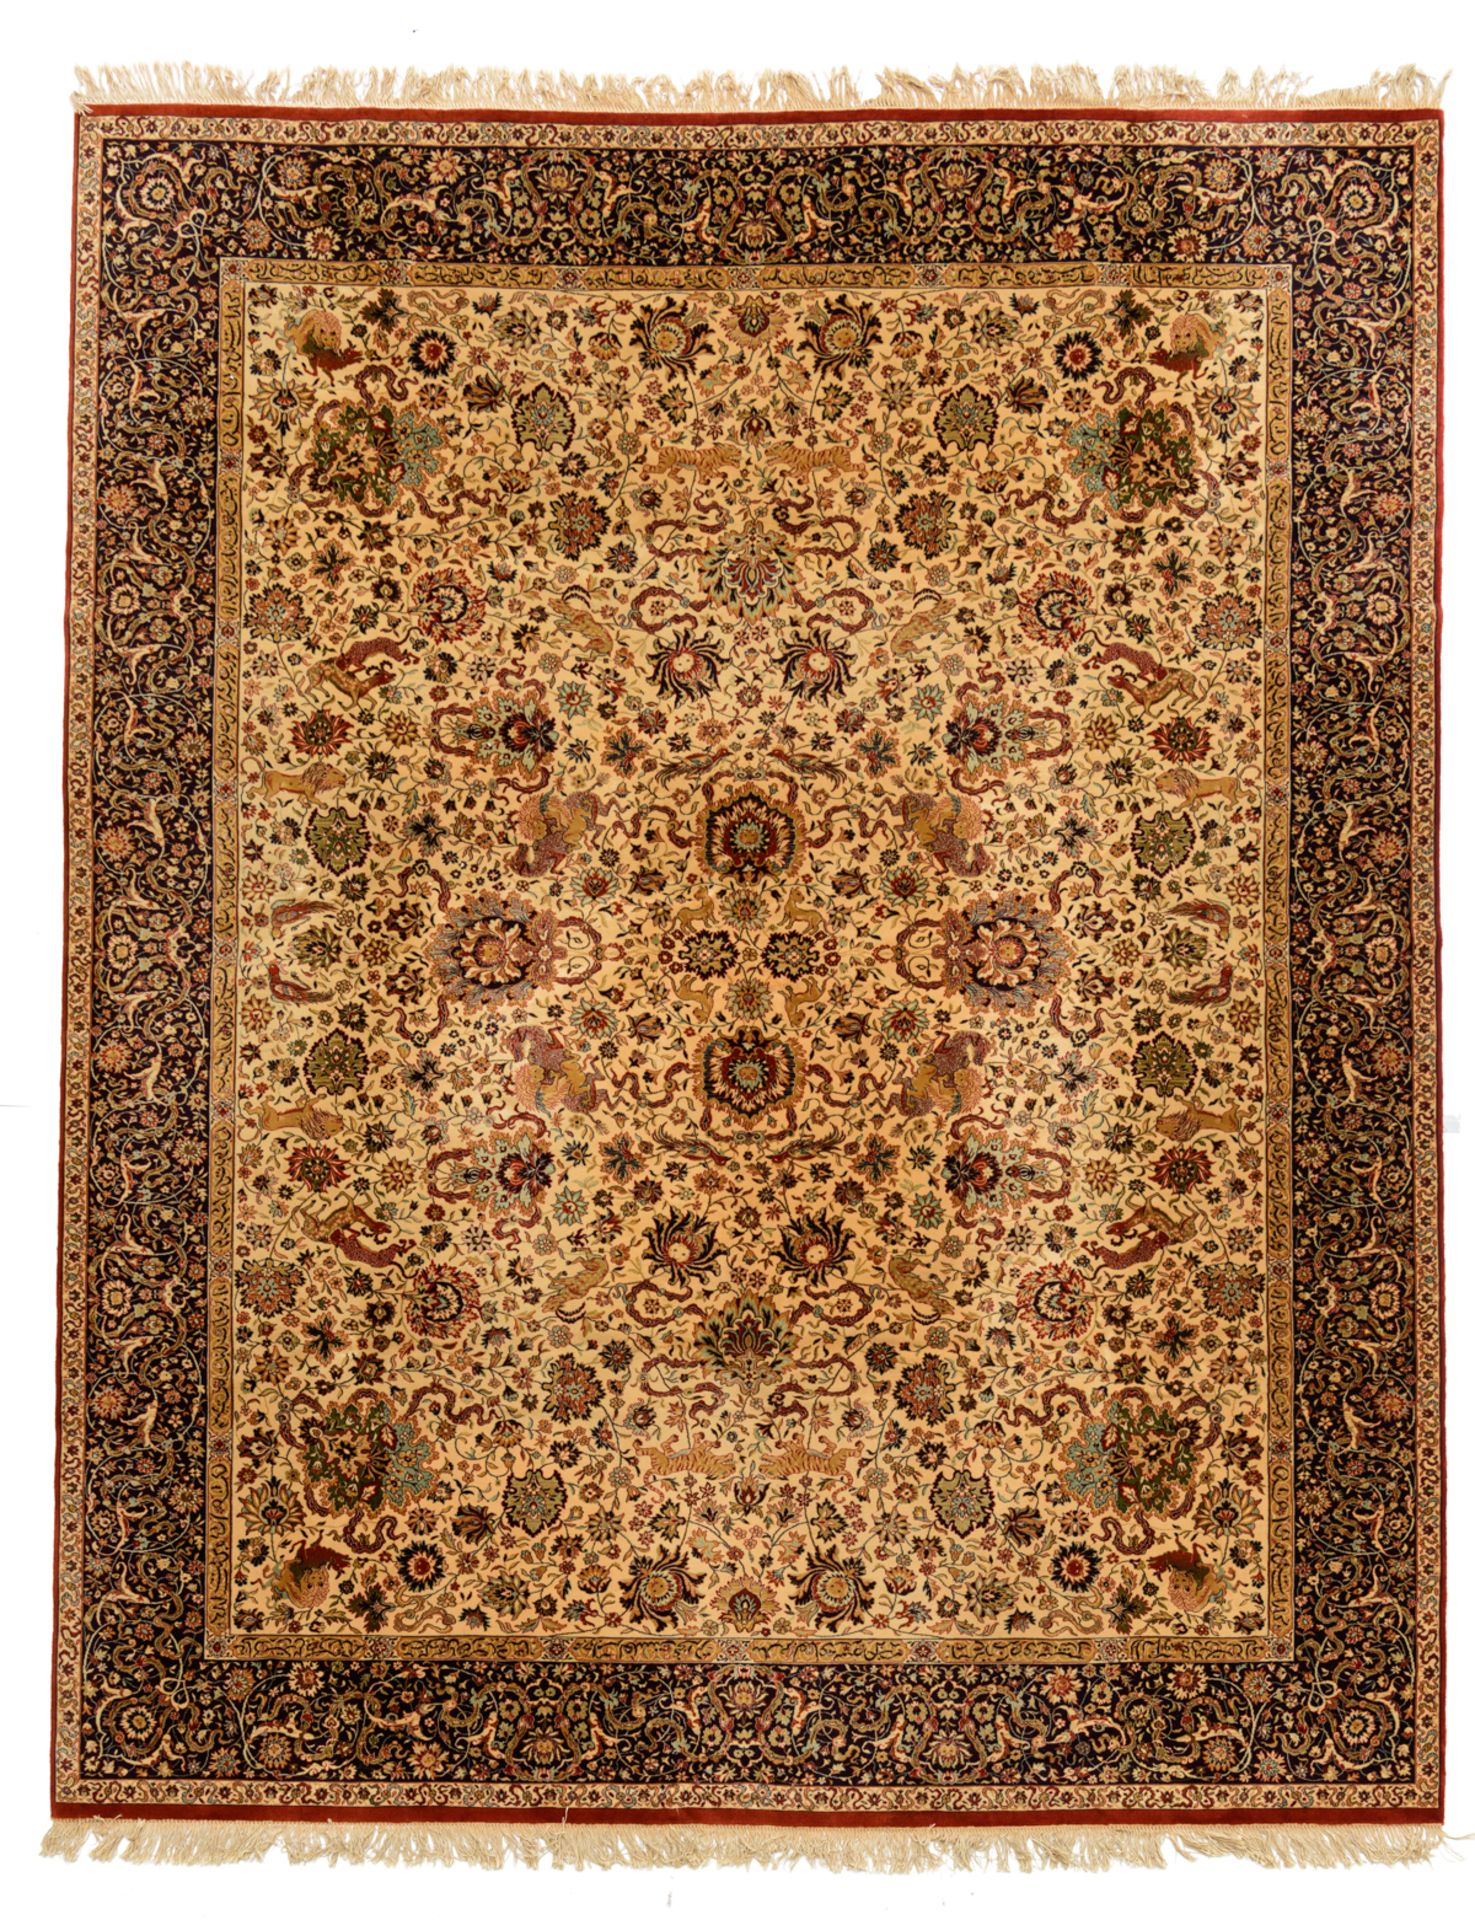 A large Oriental Keshan woolen rug, finely decorated with hunting lions, tigers, leopards and other